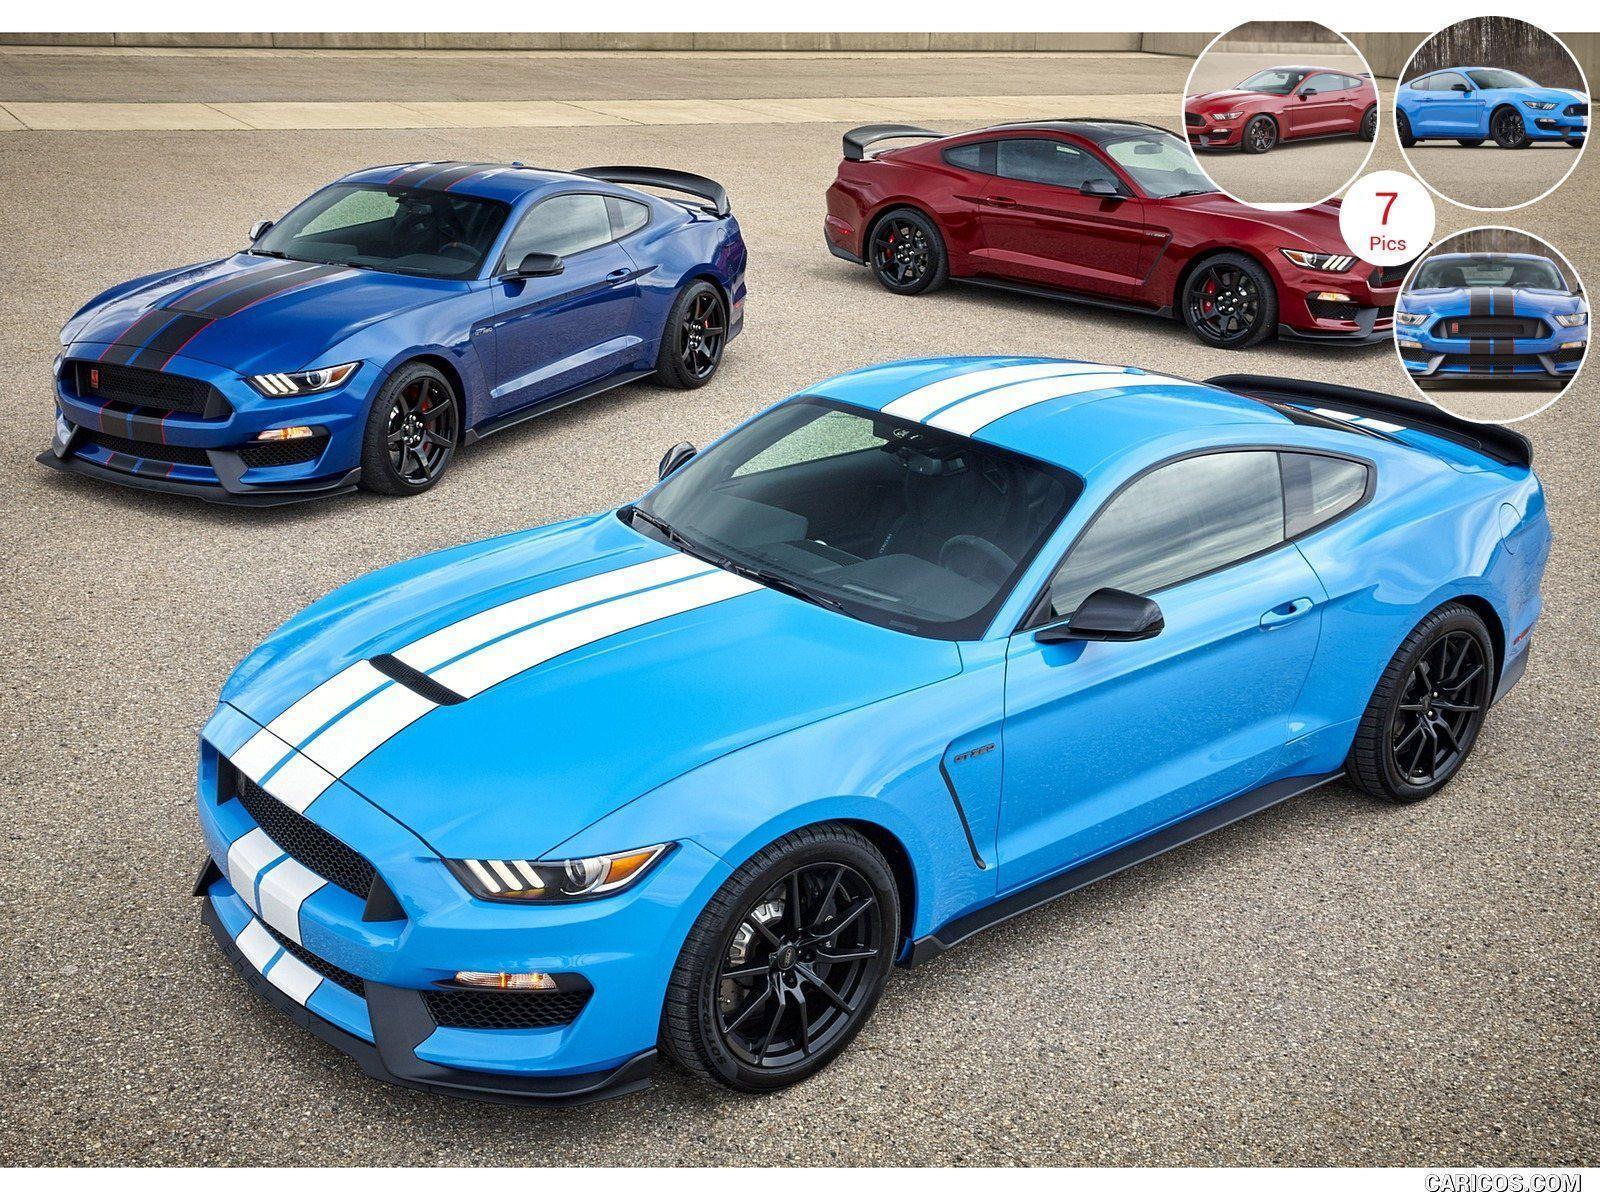 Ford Mustang Shelby GT350 and GT350R. HD Wallpaper